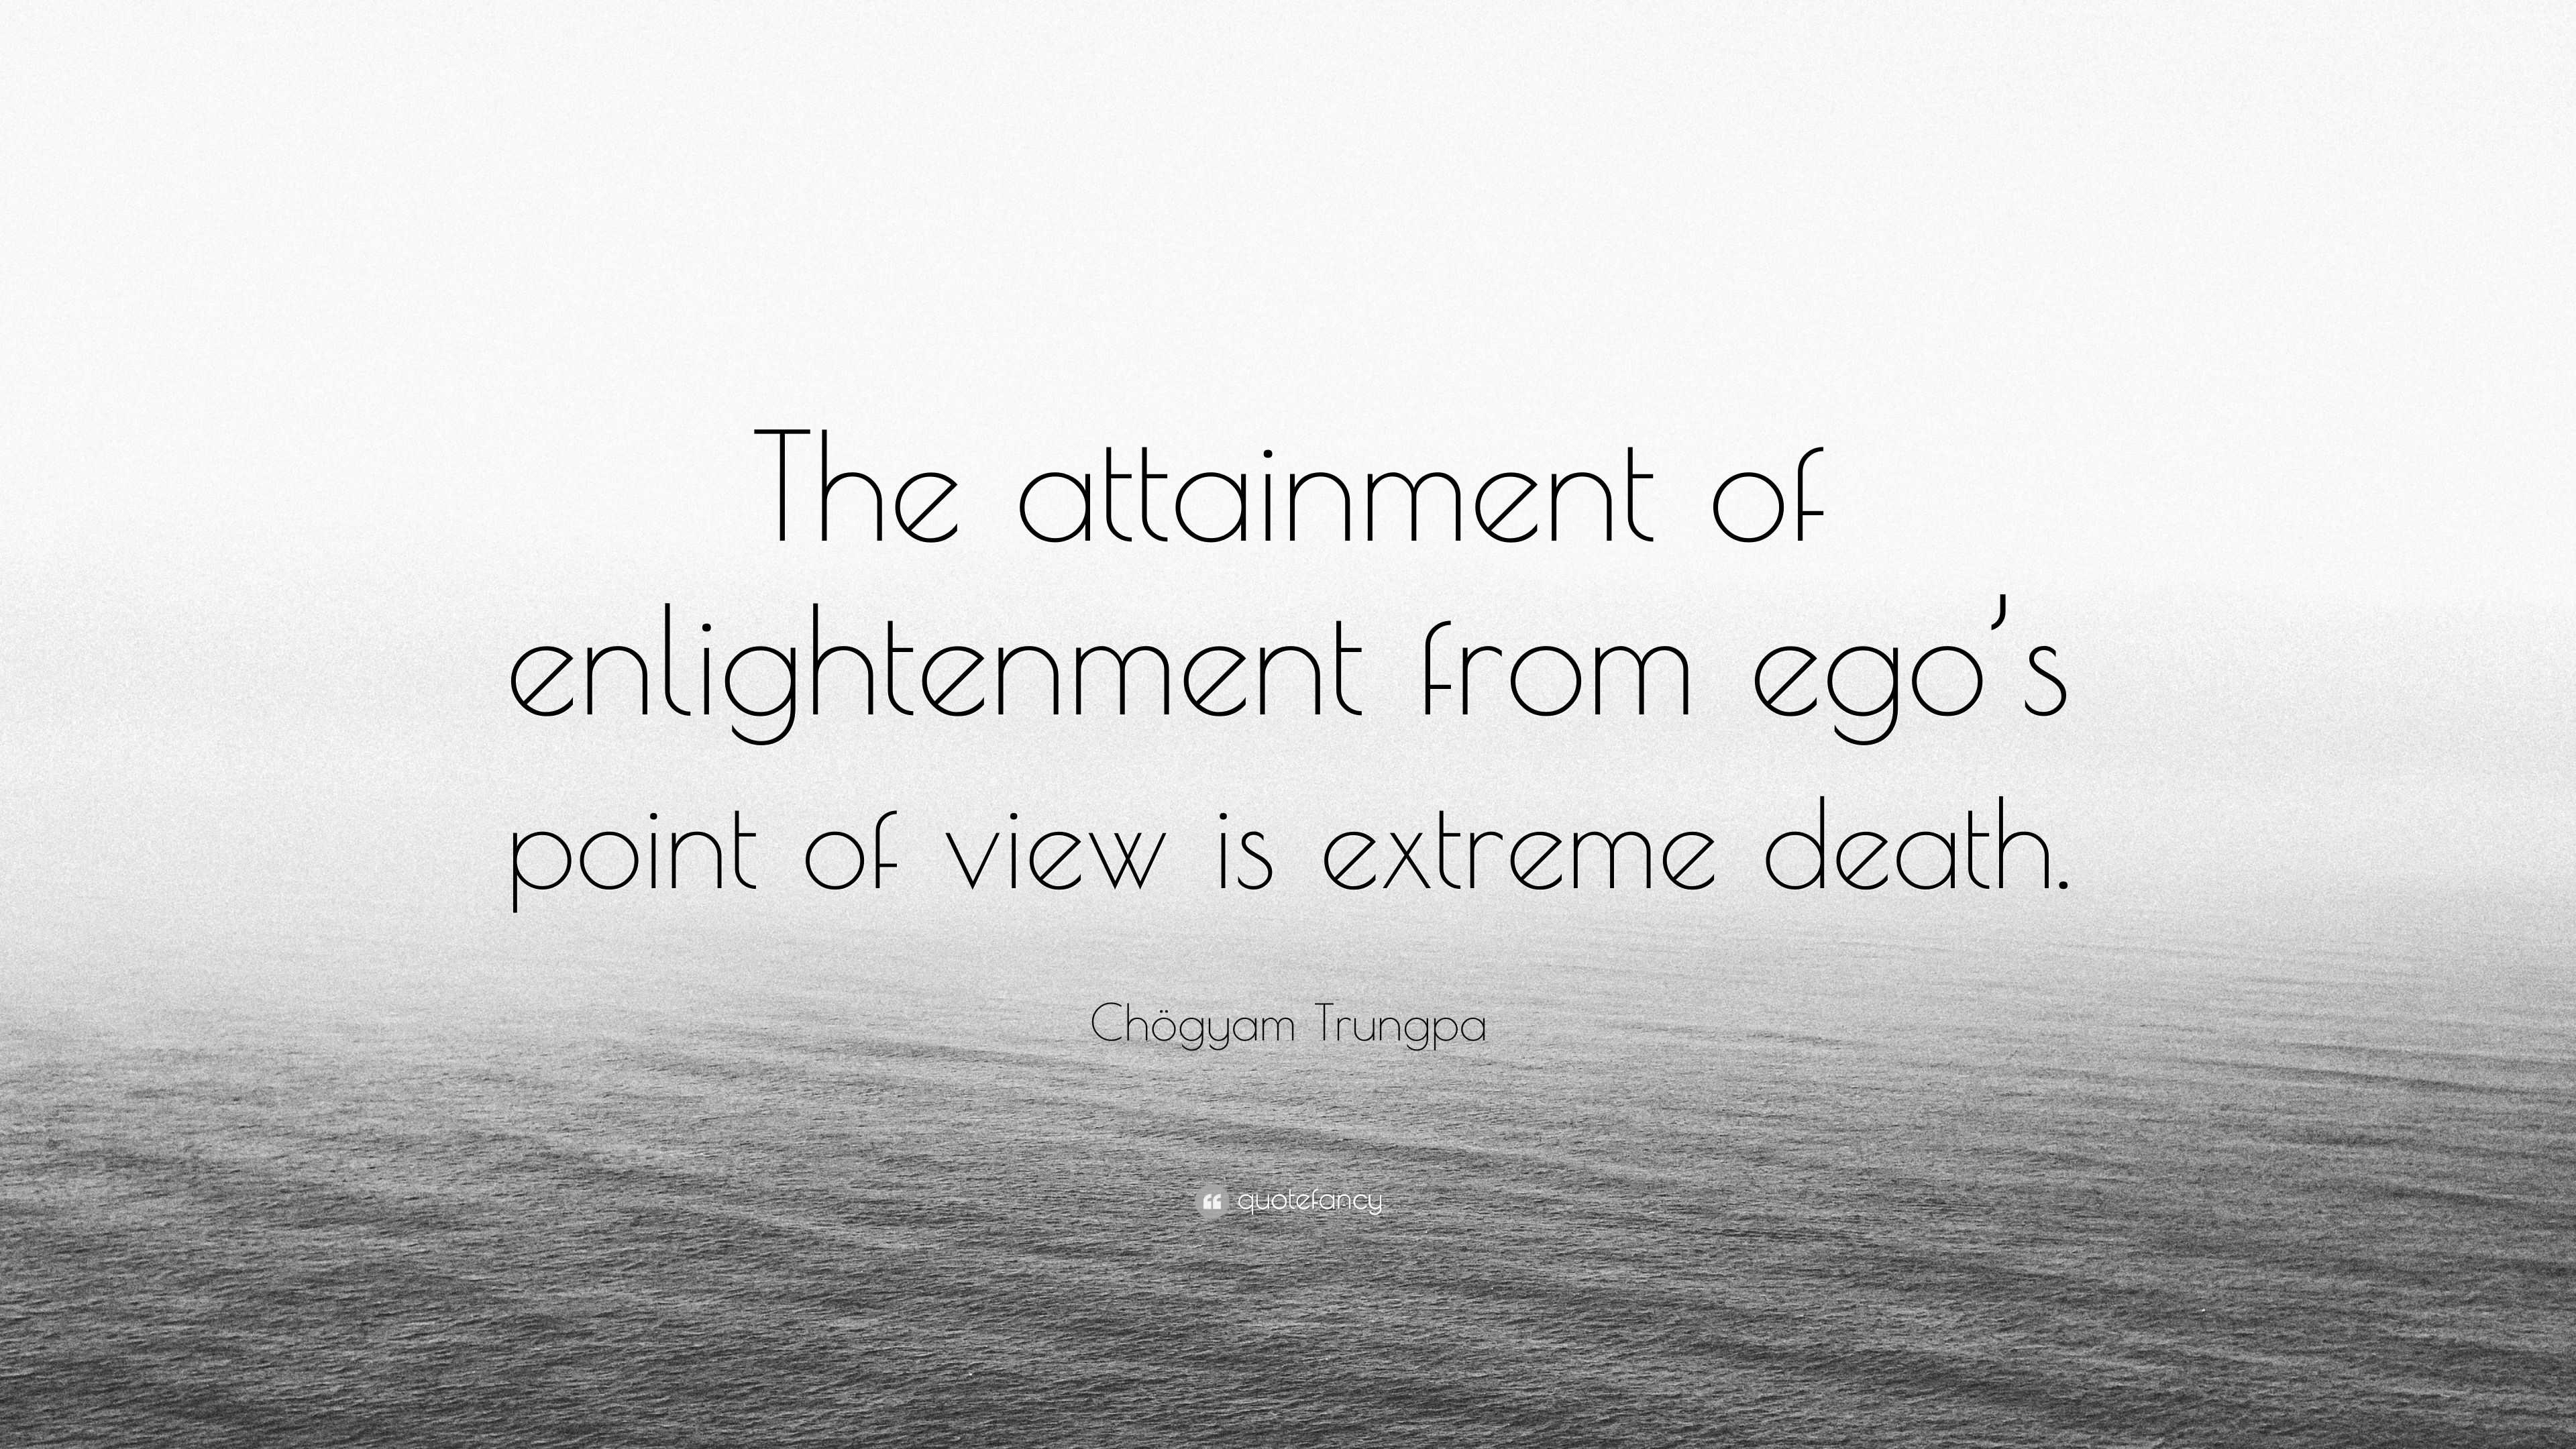 https://quotefancy.com/media/wallpaper/3840x2160/2266309-Ch-gyam-Trungpa-Quote-The-attainment-of-enlightenment-from-ego-s.jpg